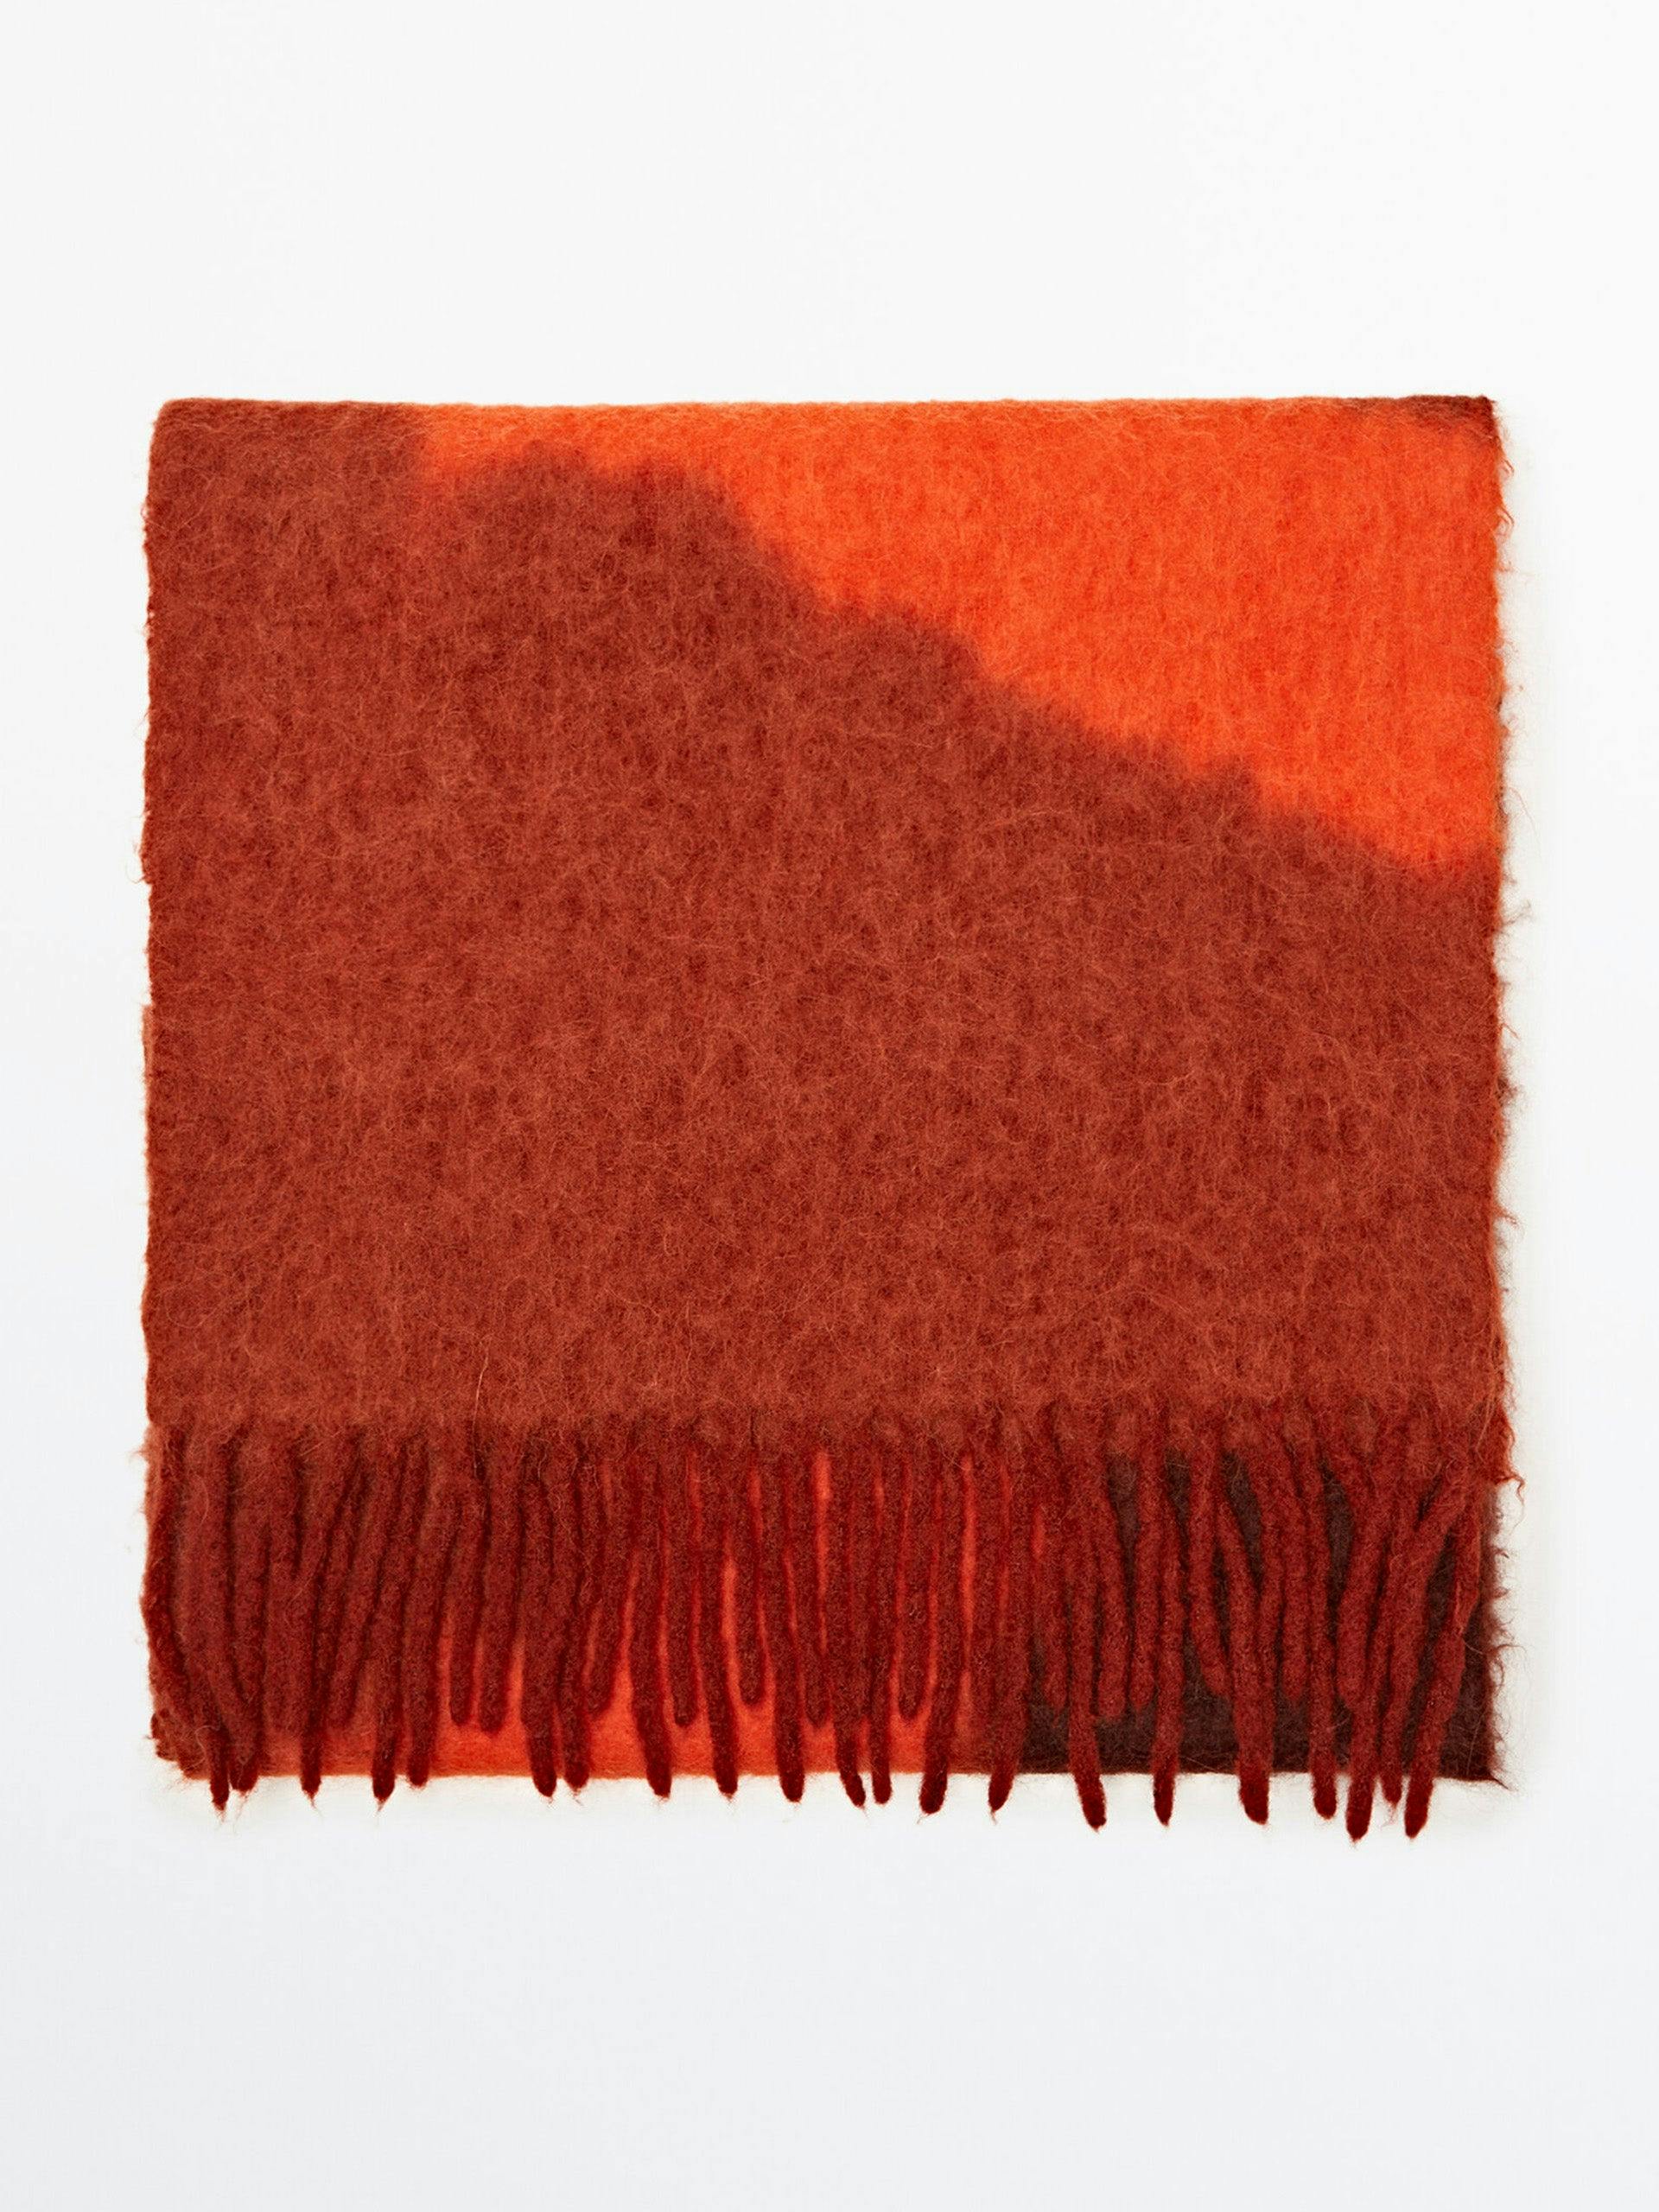 Russet tie-dye scarf with fringe detail